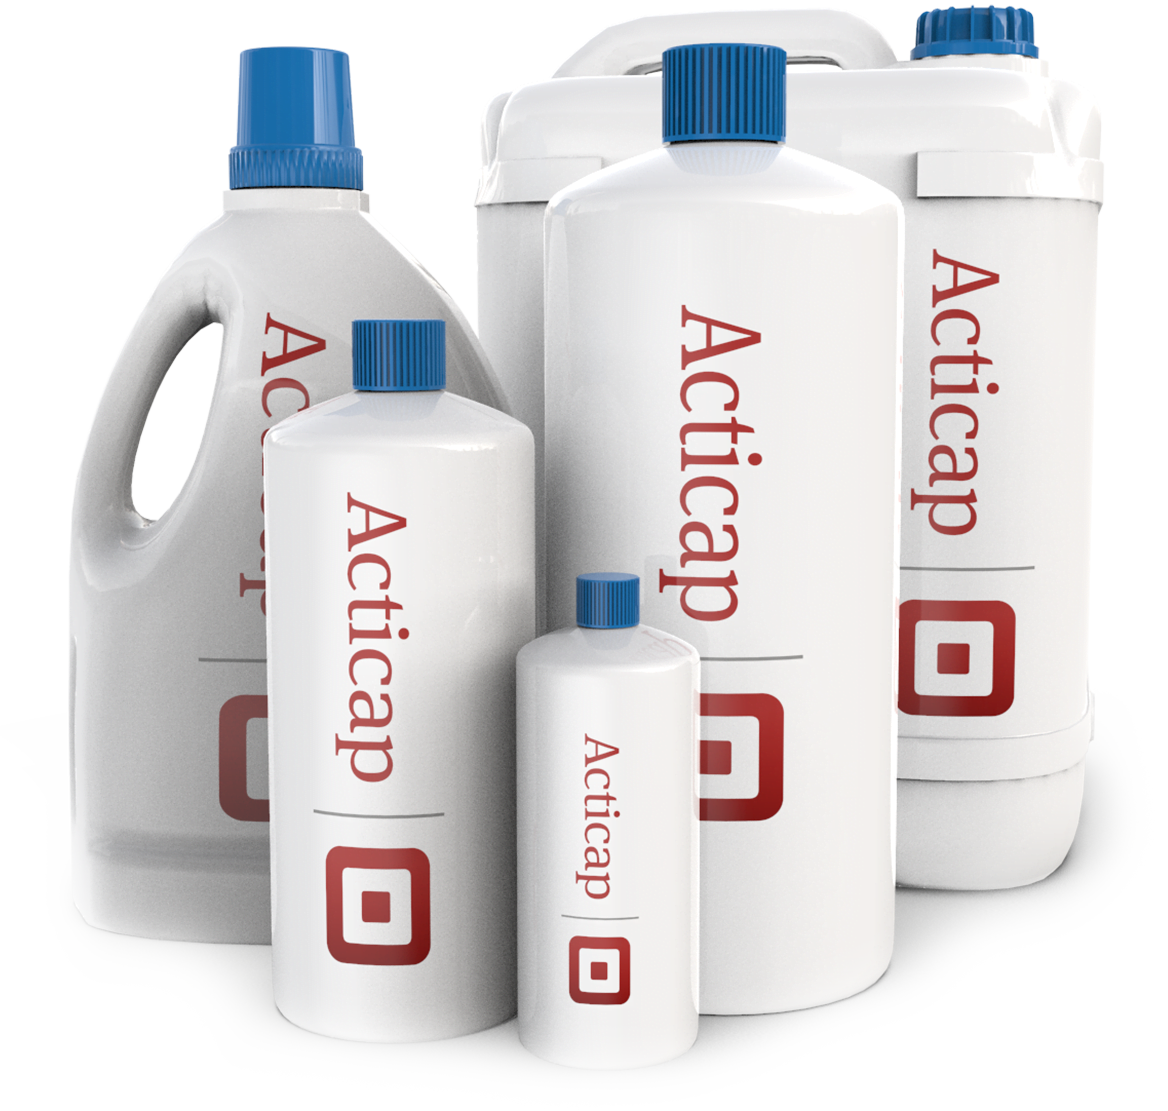 White Acticap bottles of different capacities